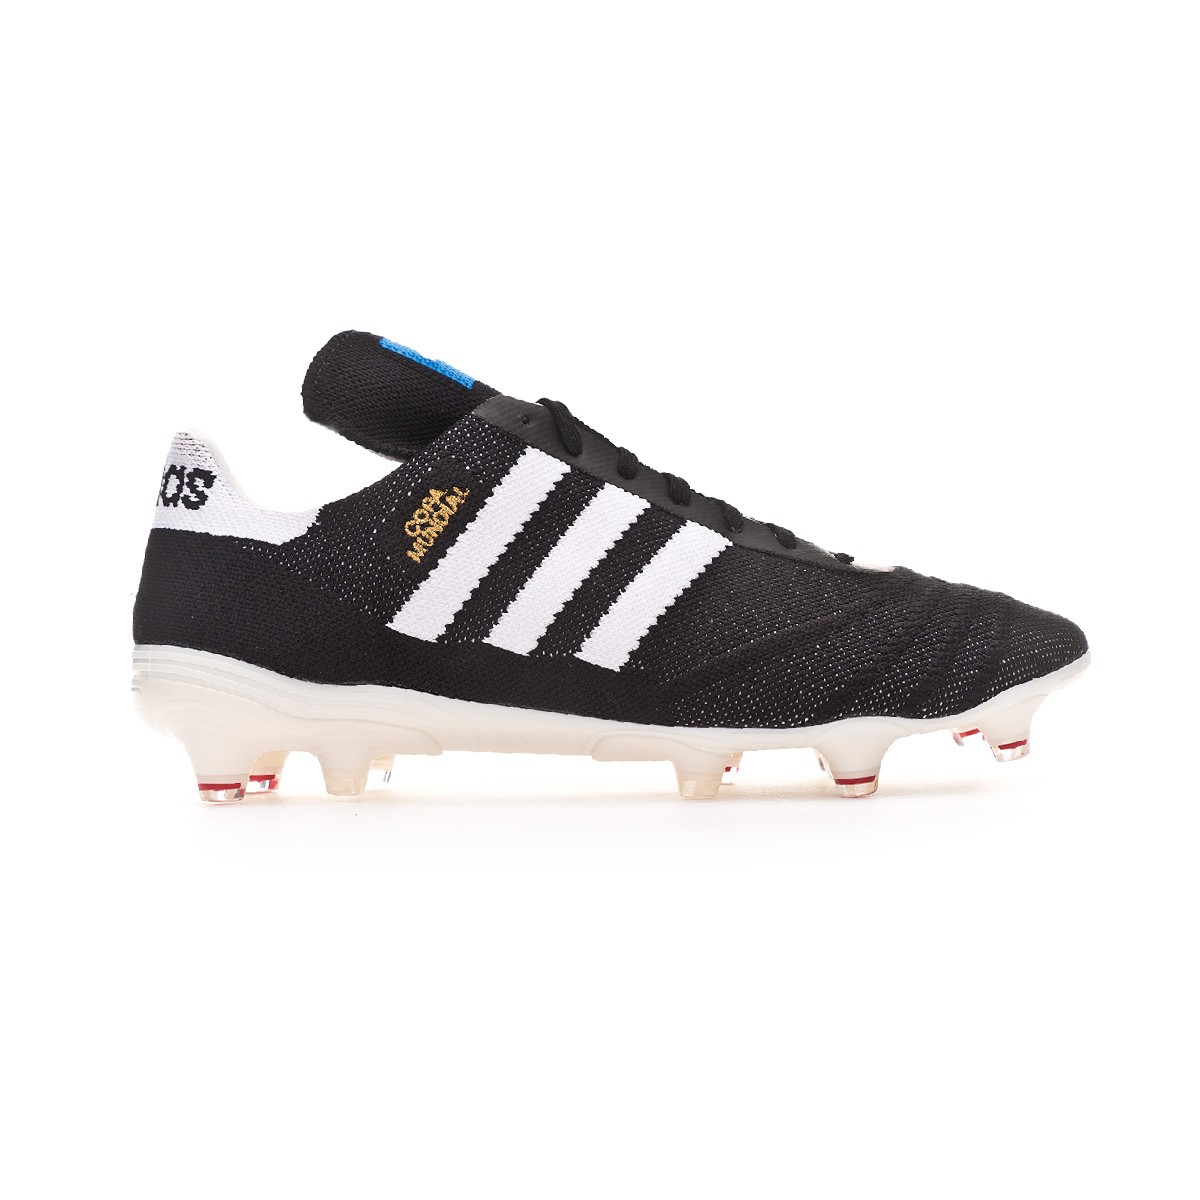 copa mundial 70 boots